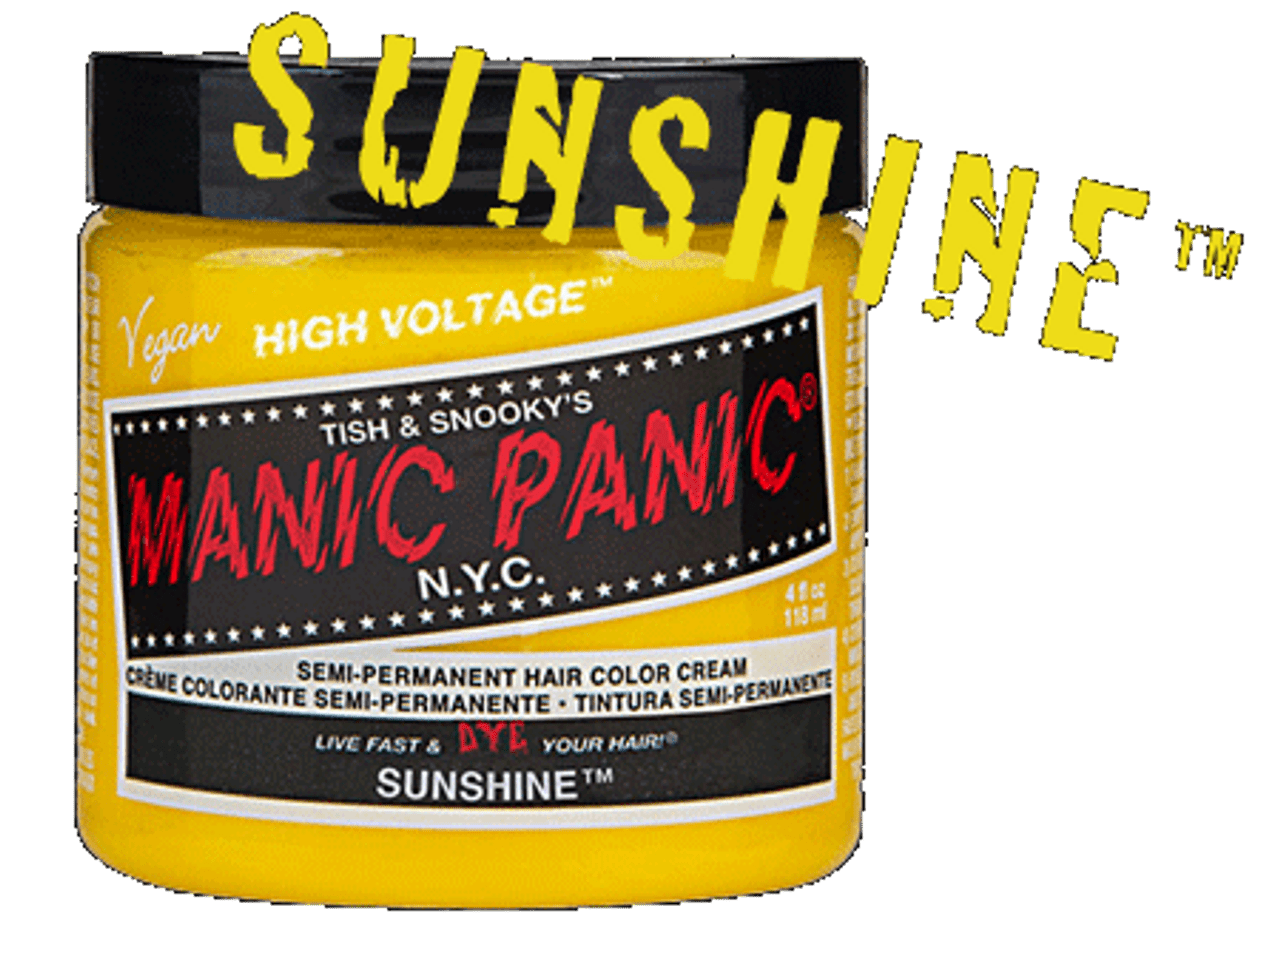 1. Manic Panic Semi-Permanent Hair Color Cream - After Midnight - wide 5